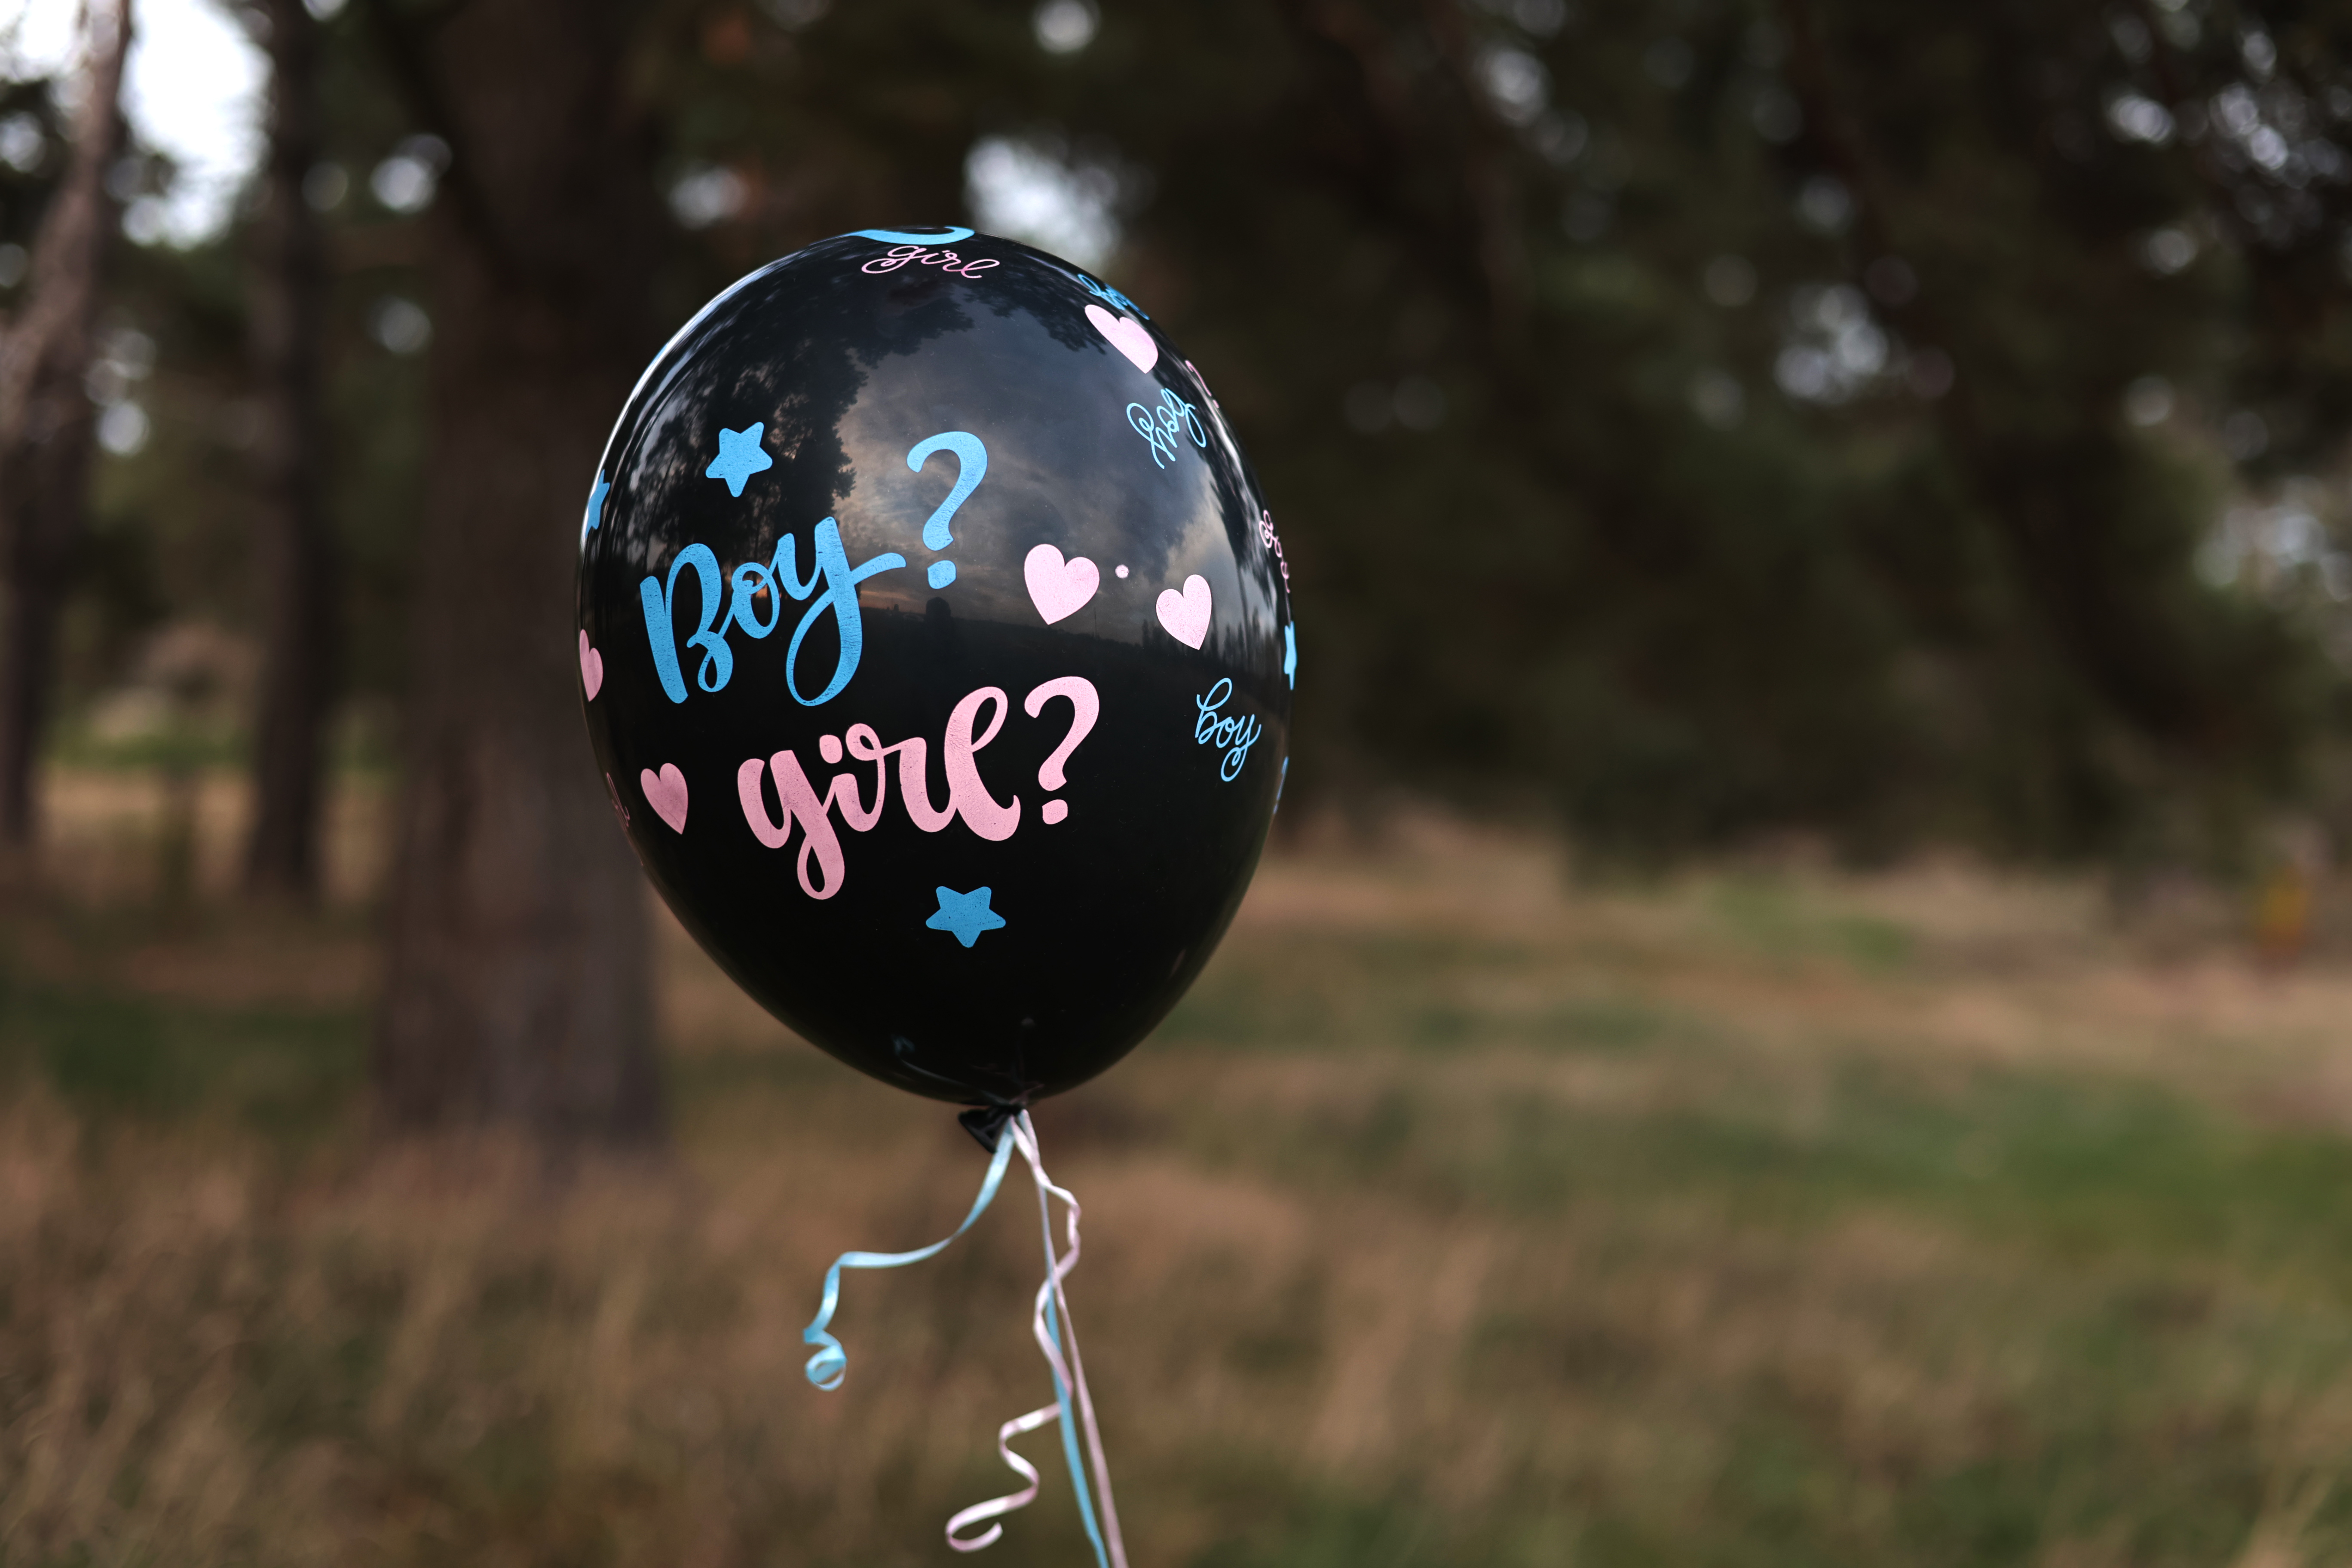 A gender reveal party balloon | Source: Getty Images